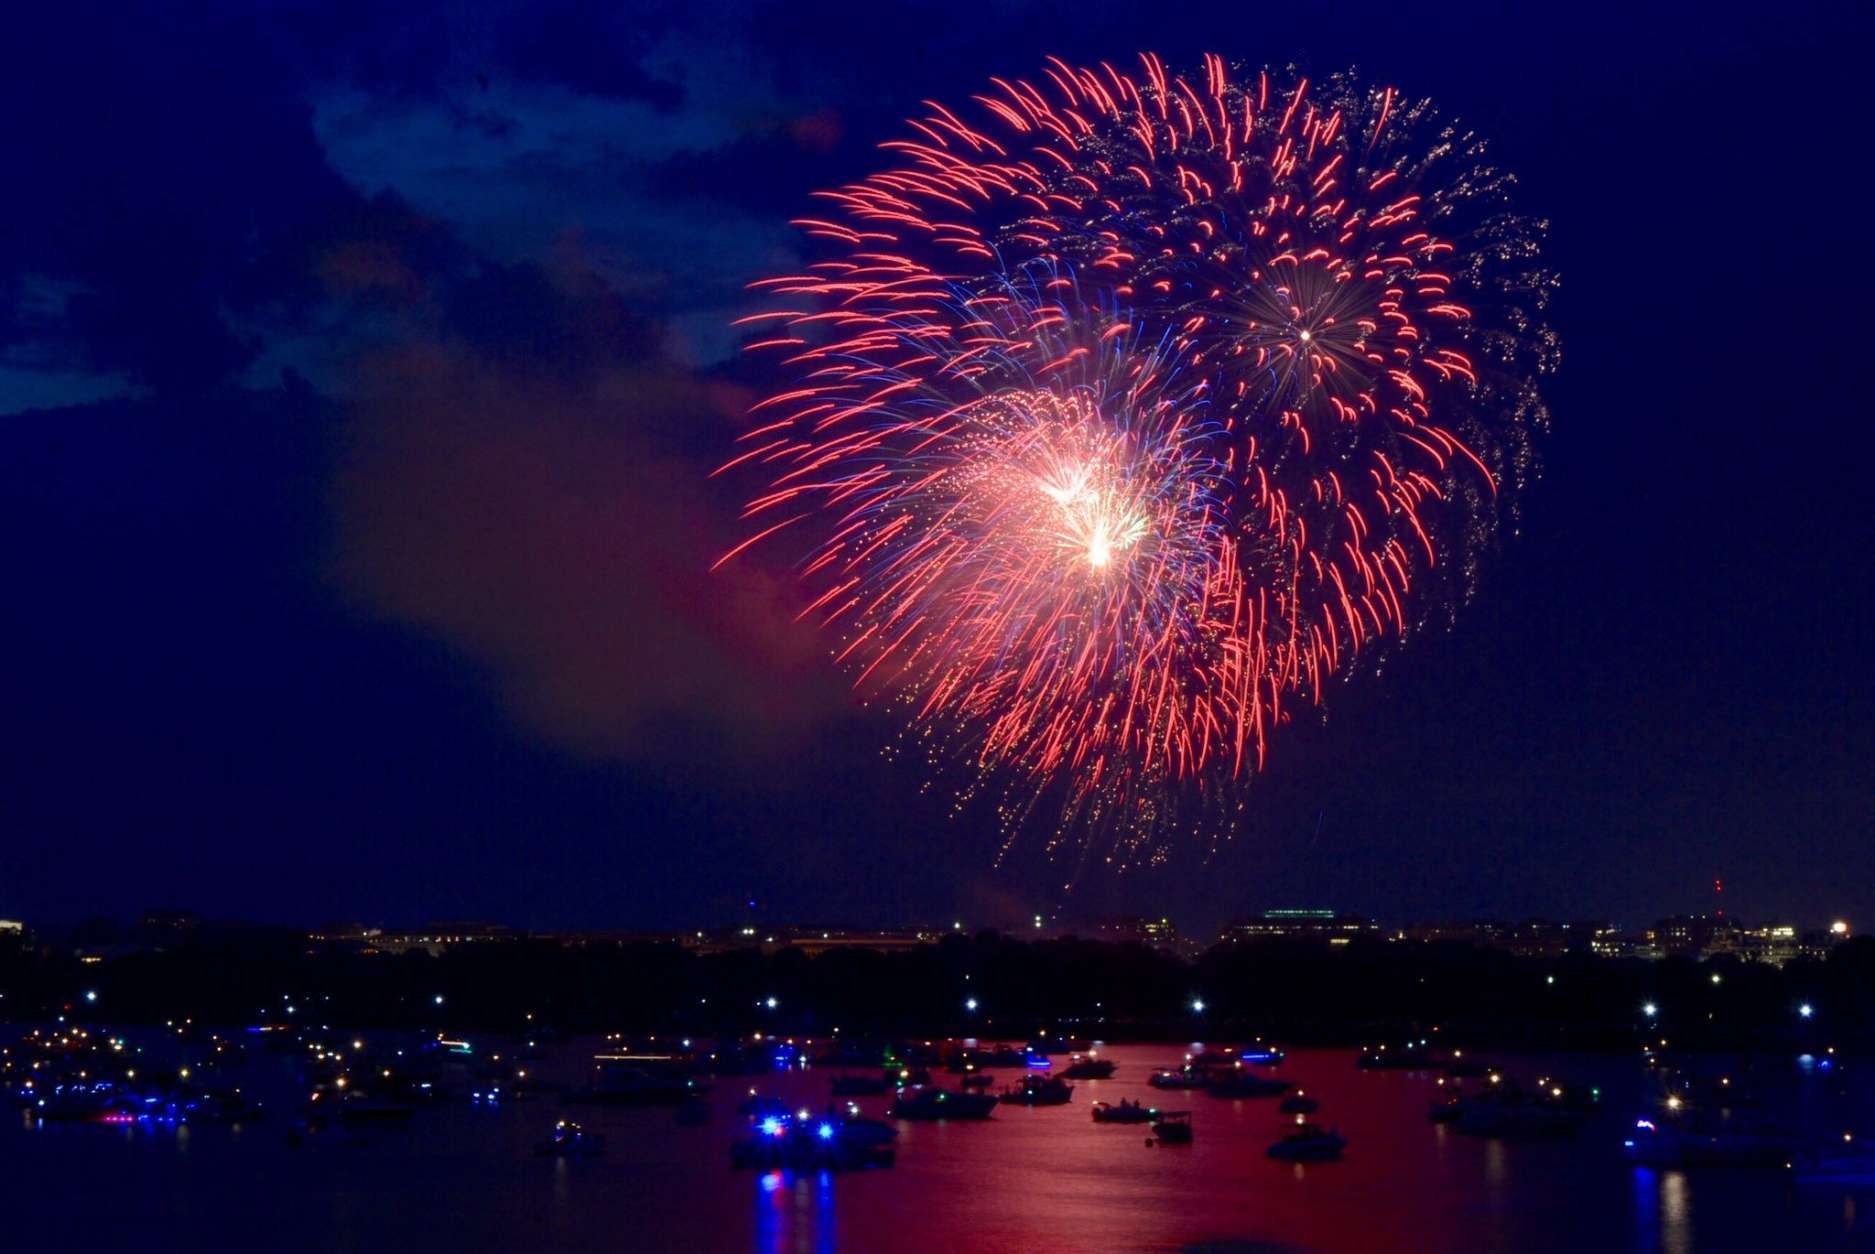 The 2017 Independence Day fireworks shimmered on the waters of the Potomac River as hundreds of spectators watched from anchored vessels. (WTOP/Dave Dildine)